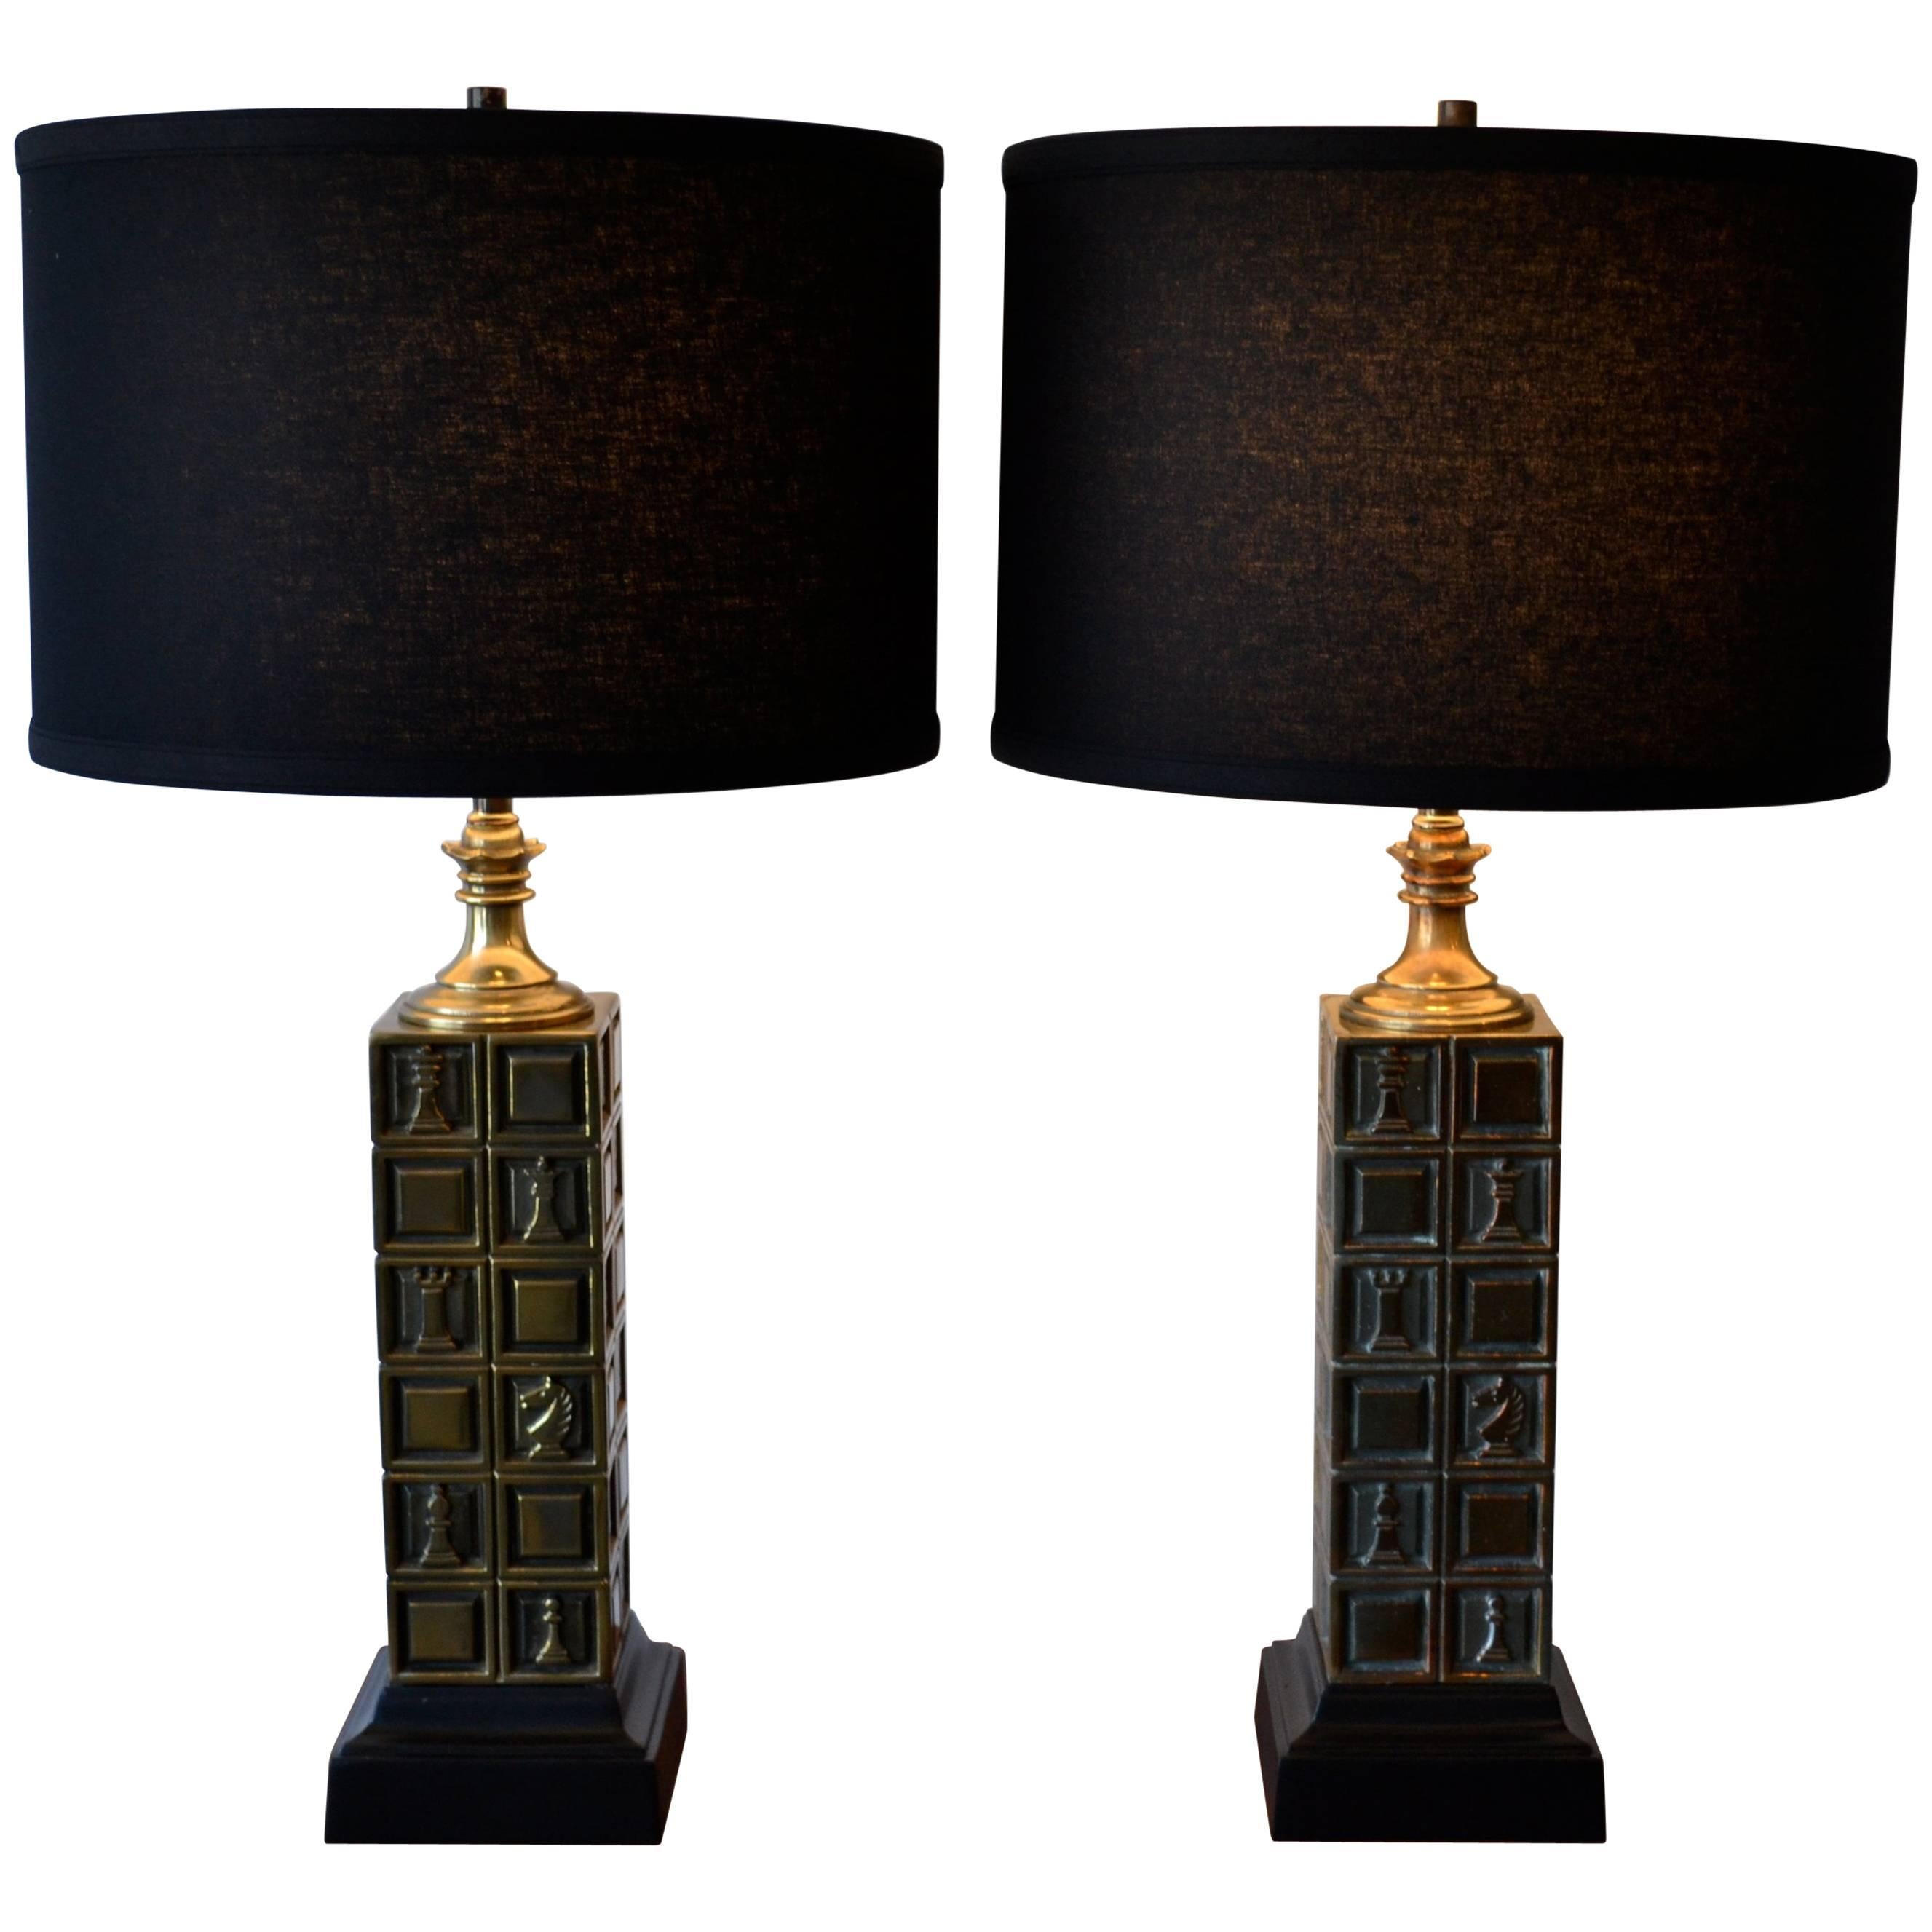 Pair of Mid Century Brass Table Lamps by Laurel Lamp Company, 1960's